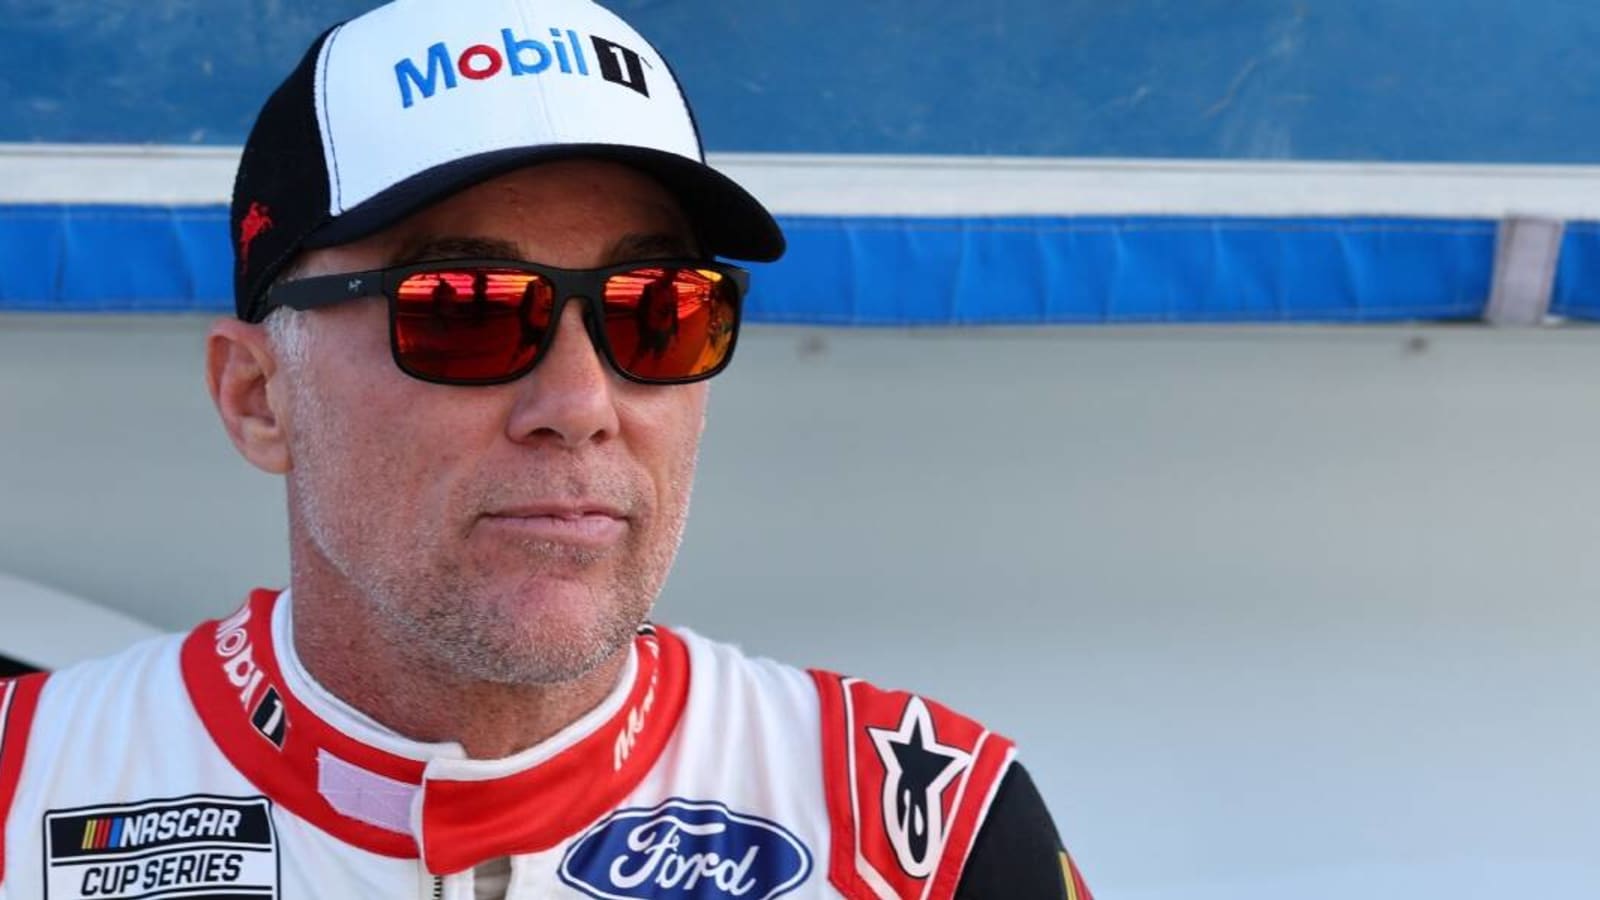 Kevin Harvick explains his goals for the final five races of the season